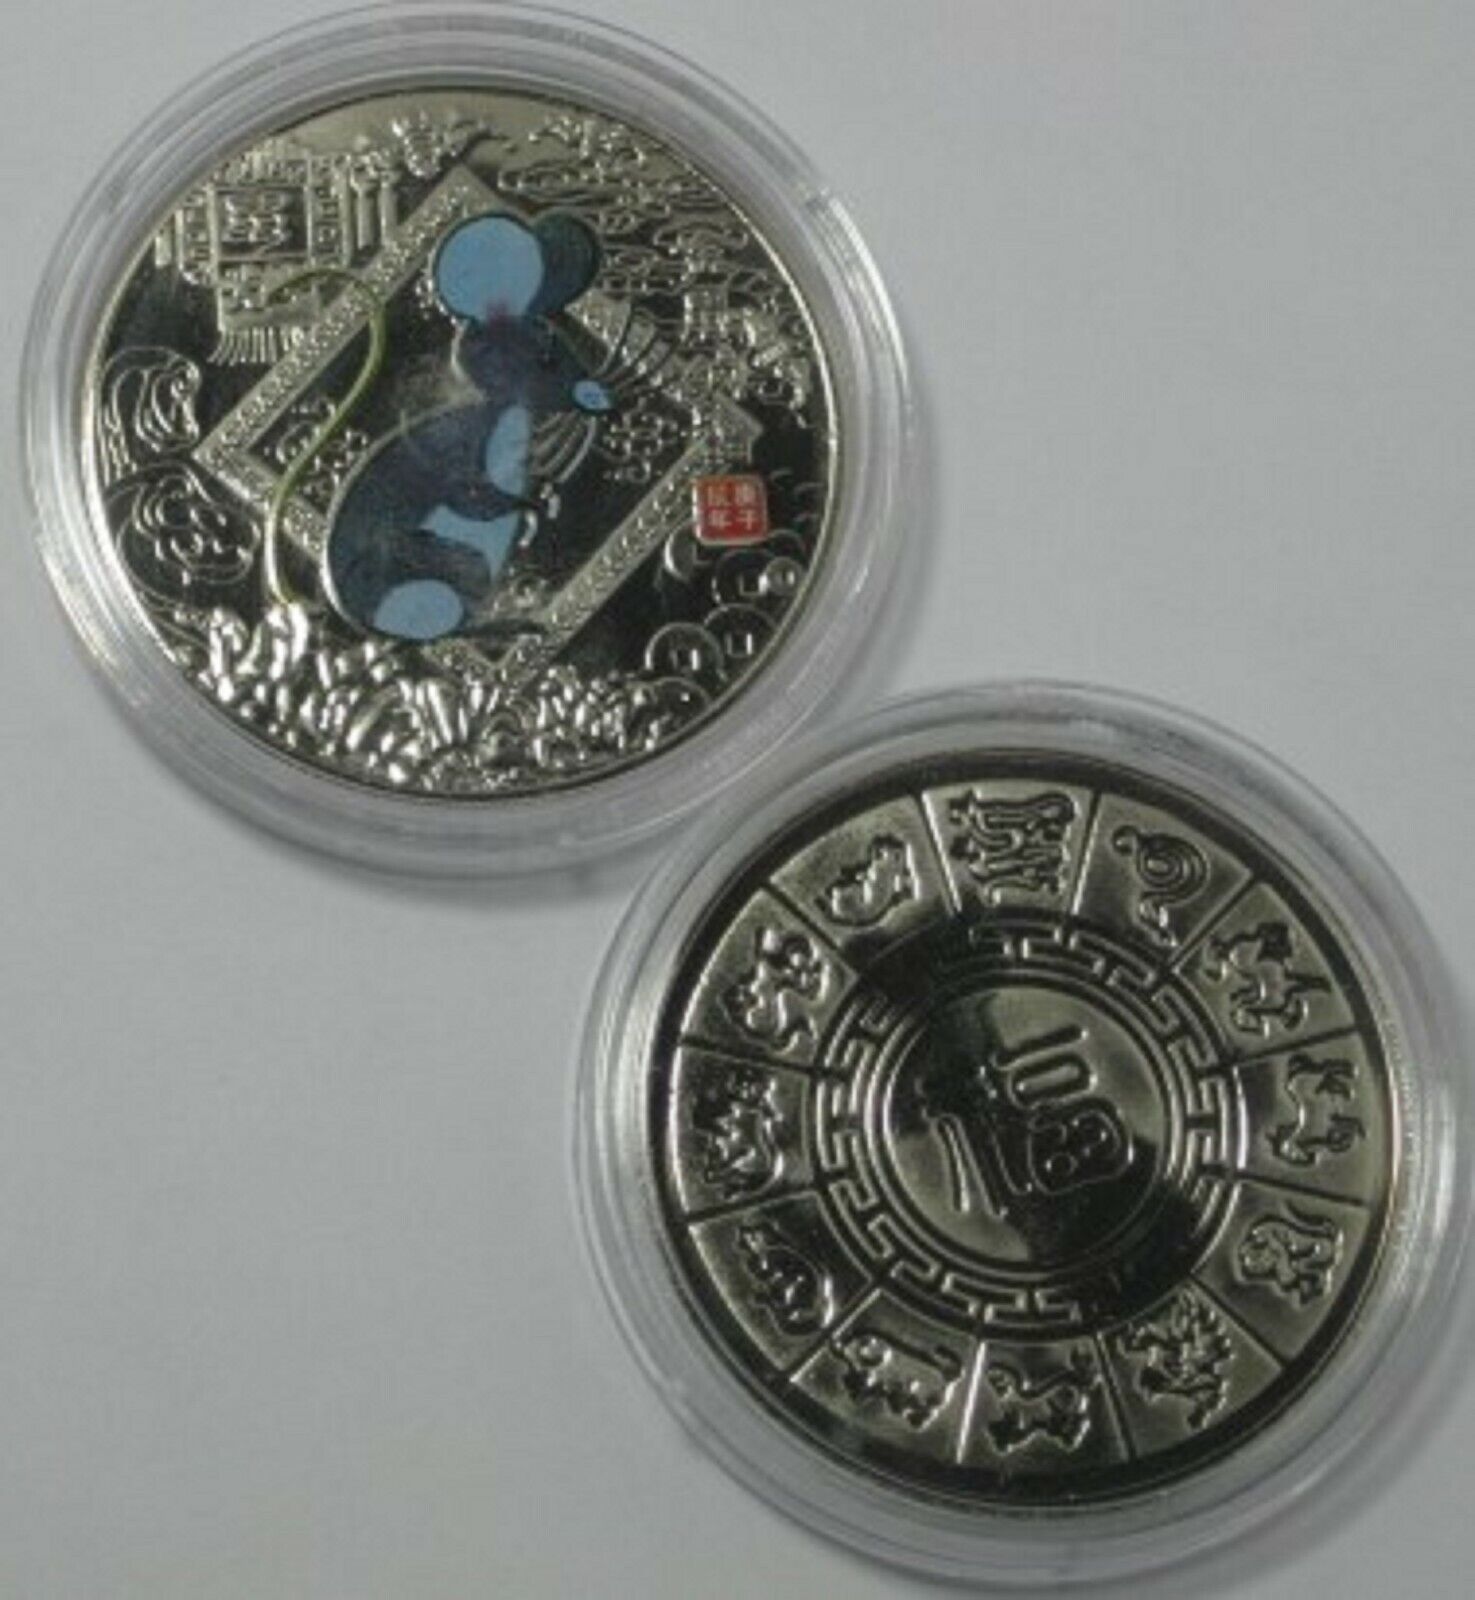 2020 YEAR OF THE RAT SILVER FINISH CHALLENGE COIN